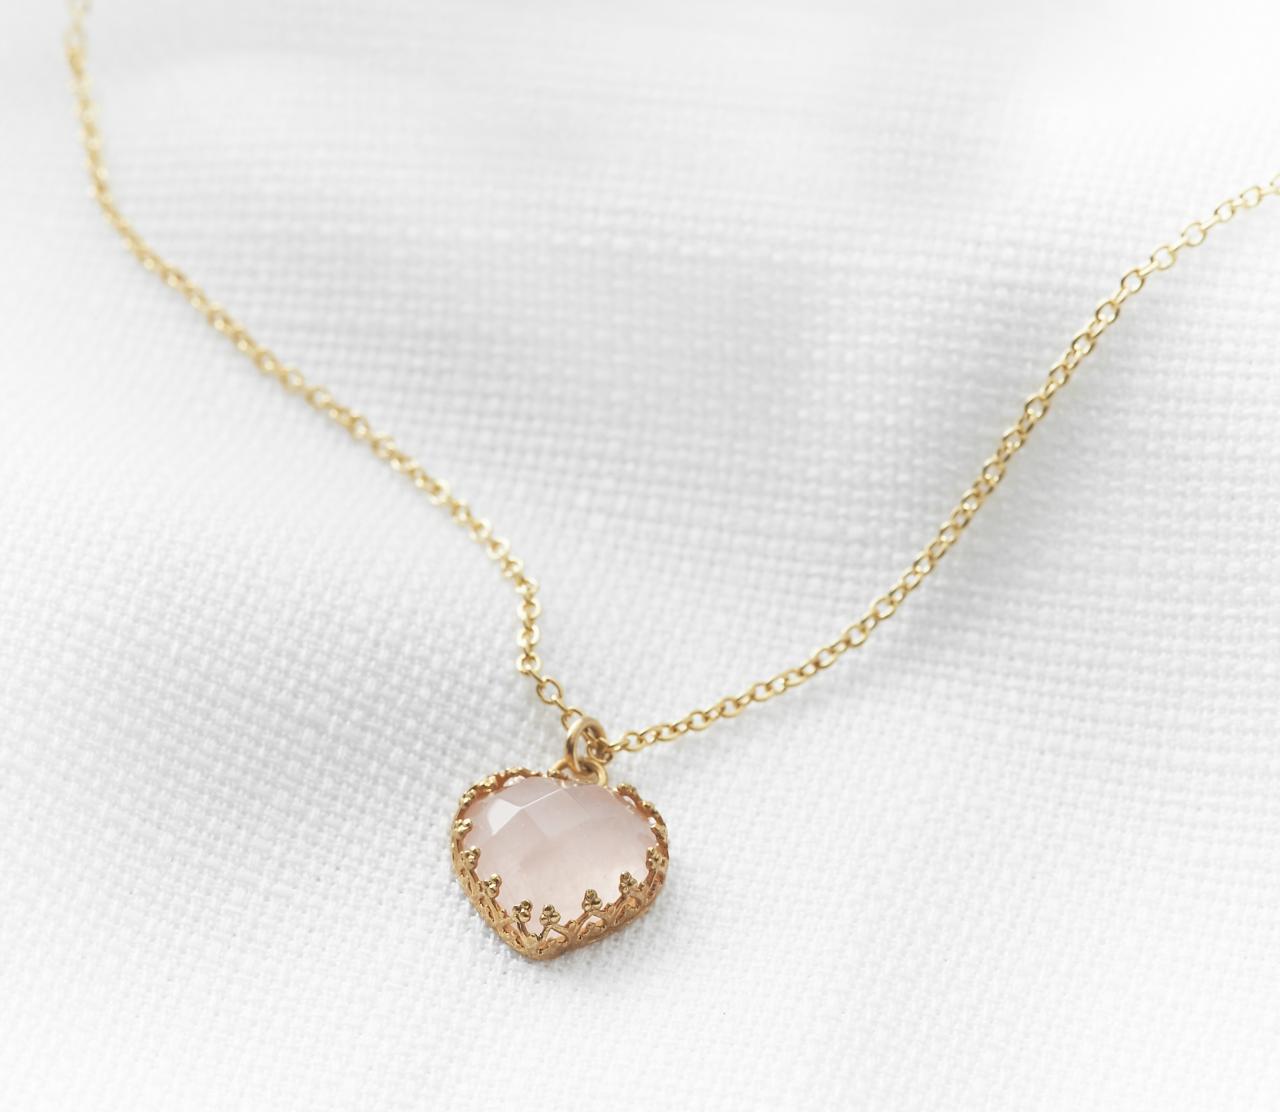 Gold Heart Necklace, Pink Rose Quartz Stone, Vintage Necklace, Bridal Gold Jewelry, Dainty Necklace, Birthday Gift, Unique Gold Necklace